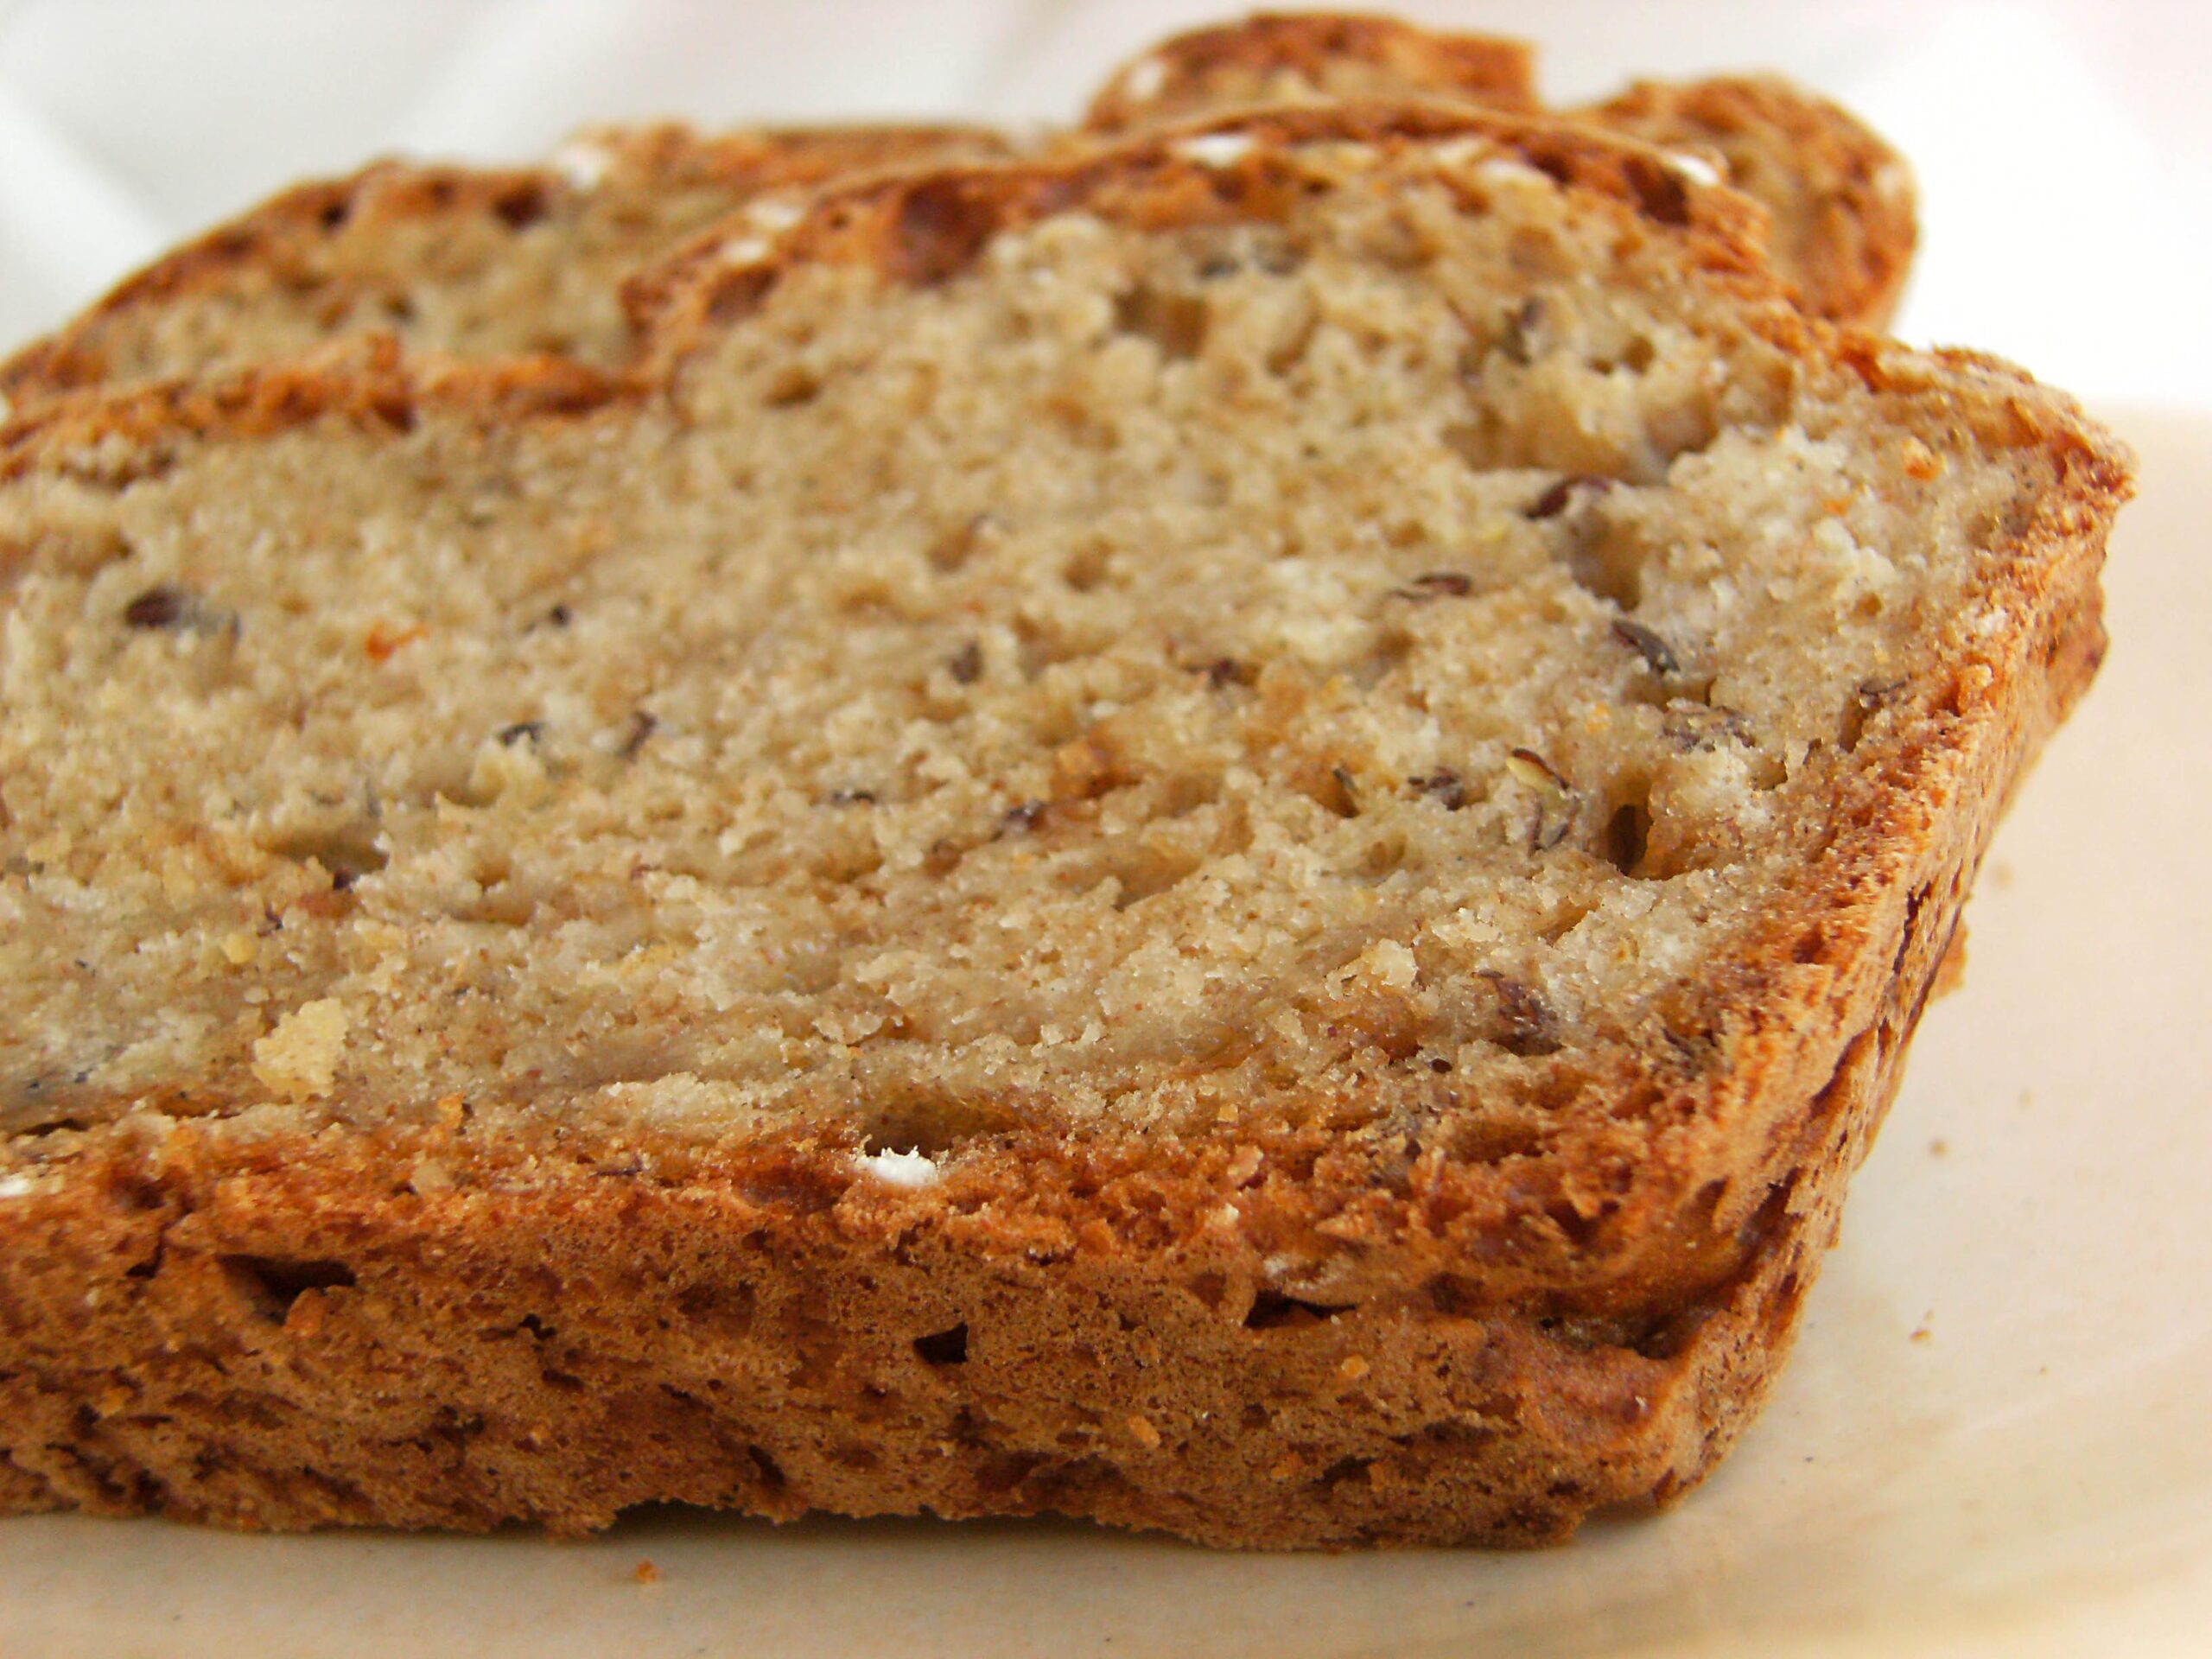  A rustic loaf of Irish brown bread, perfect for breakfast or as a snack.